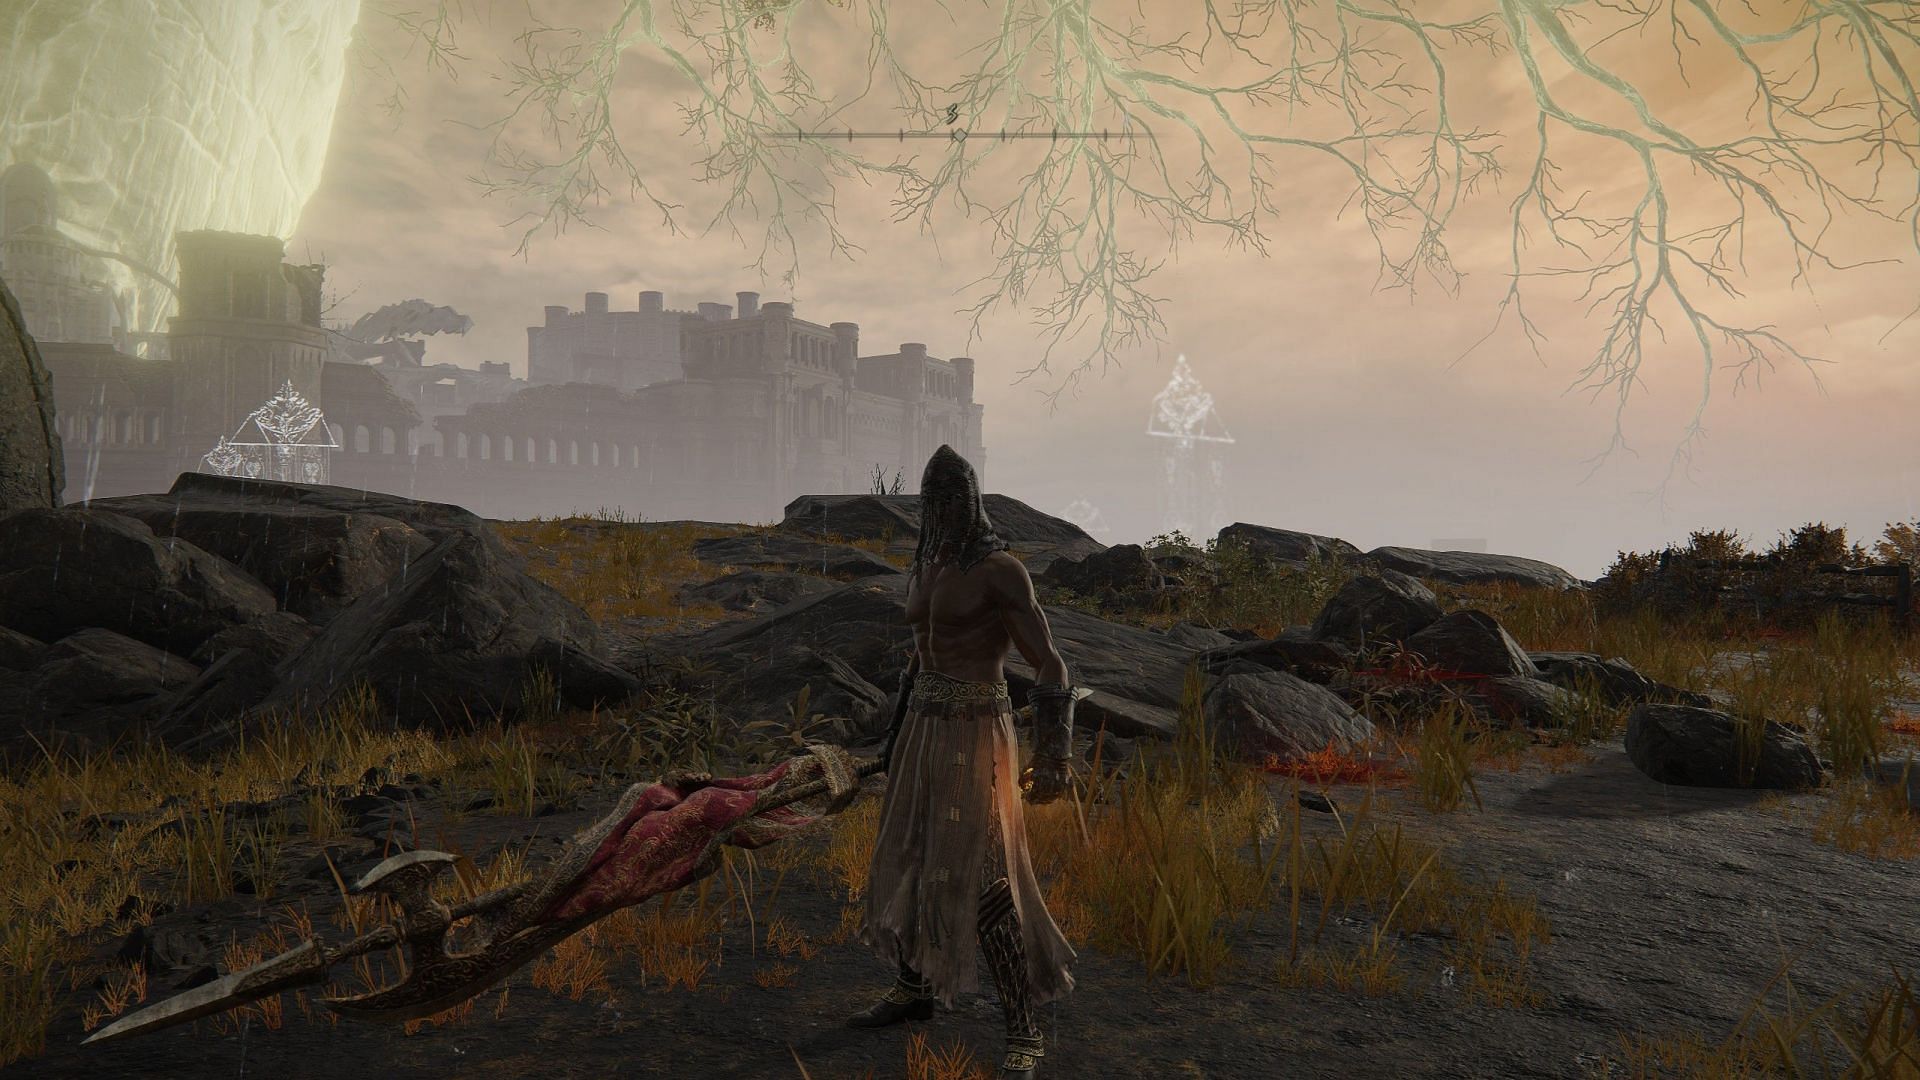 The Heretic build in Elden Ring utilizes spells considered as heresy (Image by FromSoftware)